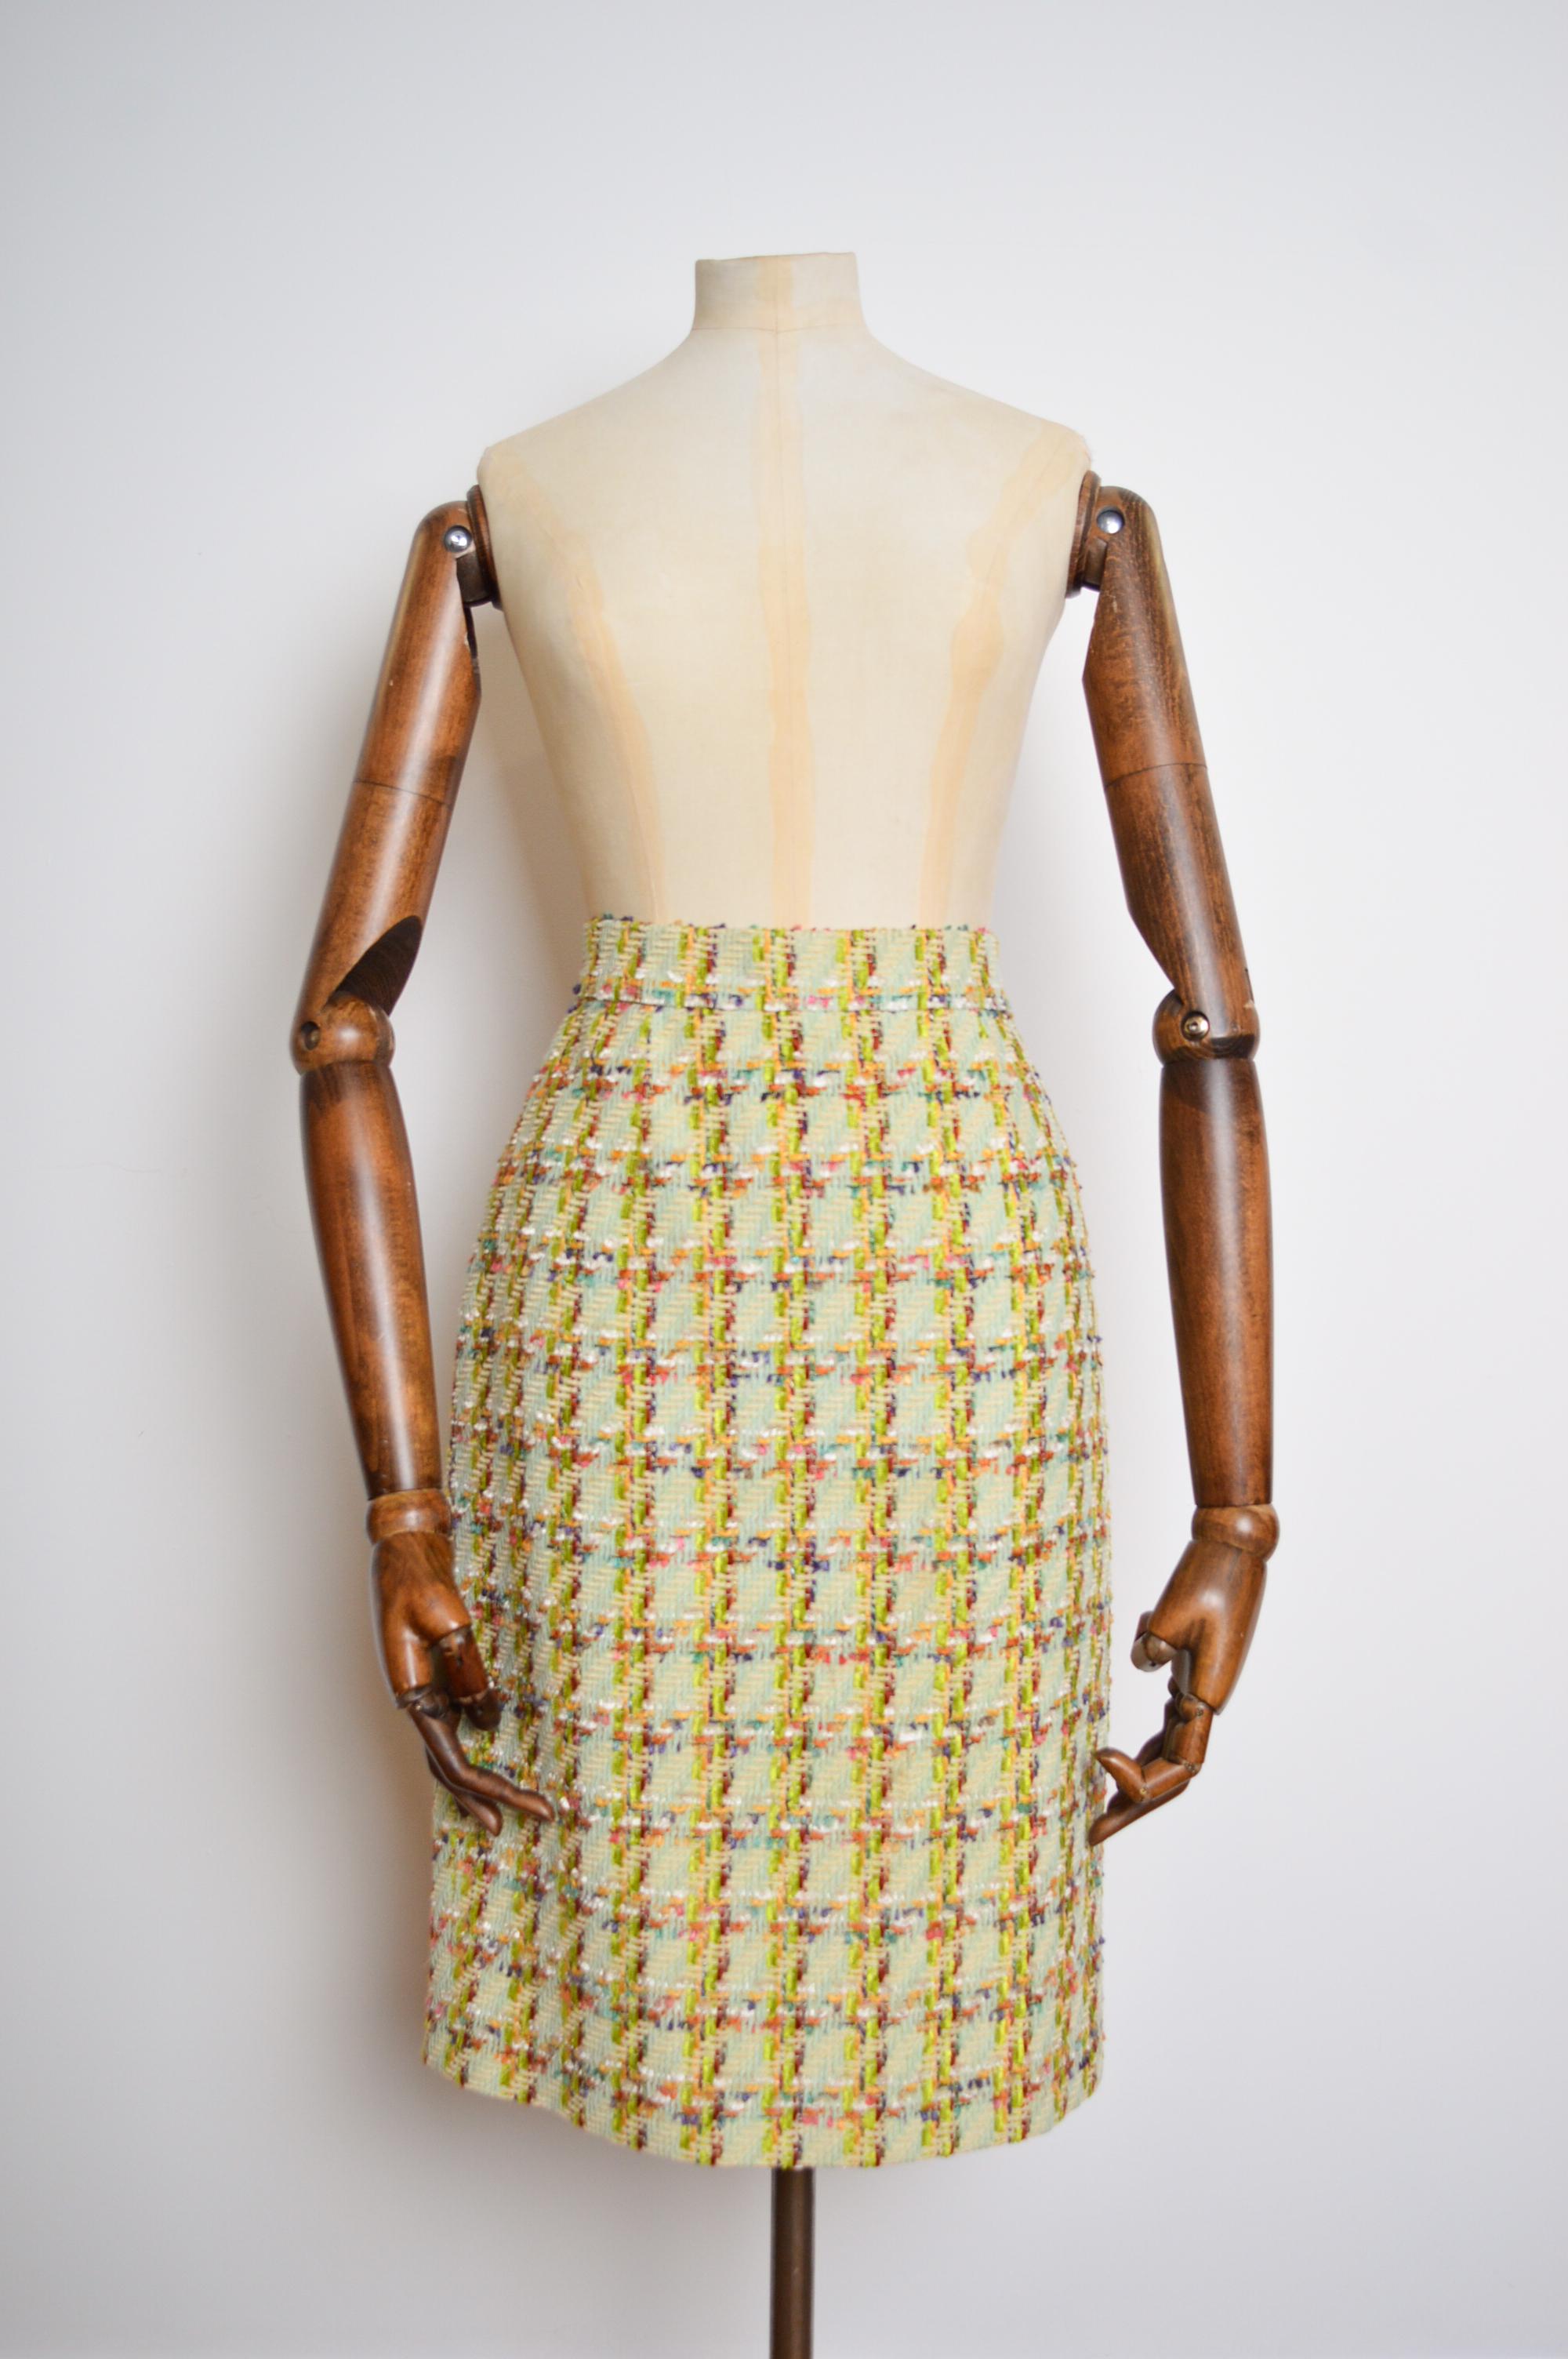 S/S 1993 ROCHAS Jewel Tone Lime Green Tweed Boucle Jacket & Skirt Matching Set For Sale 5